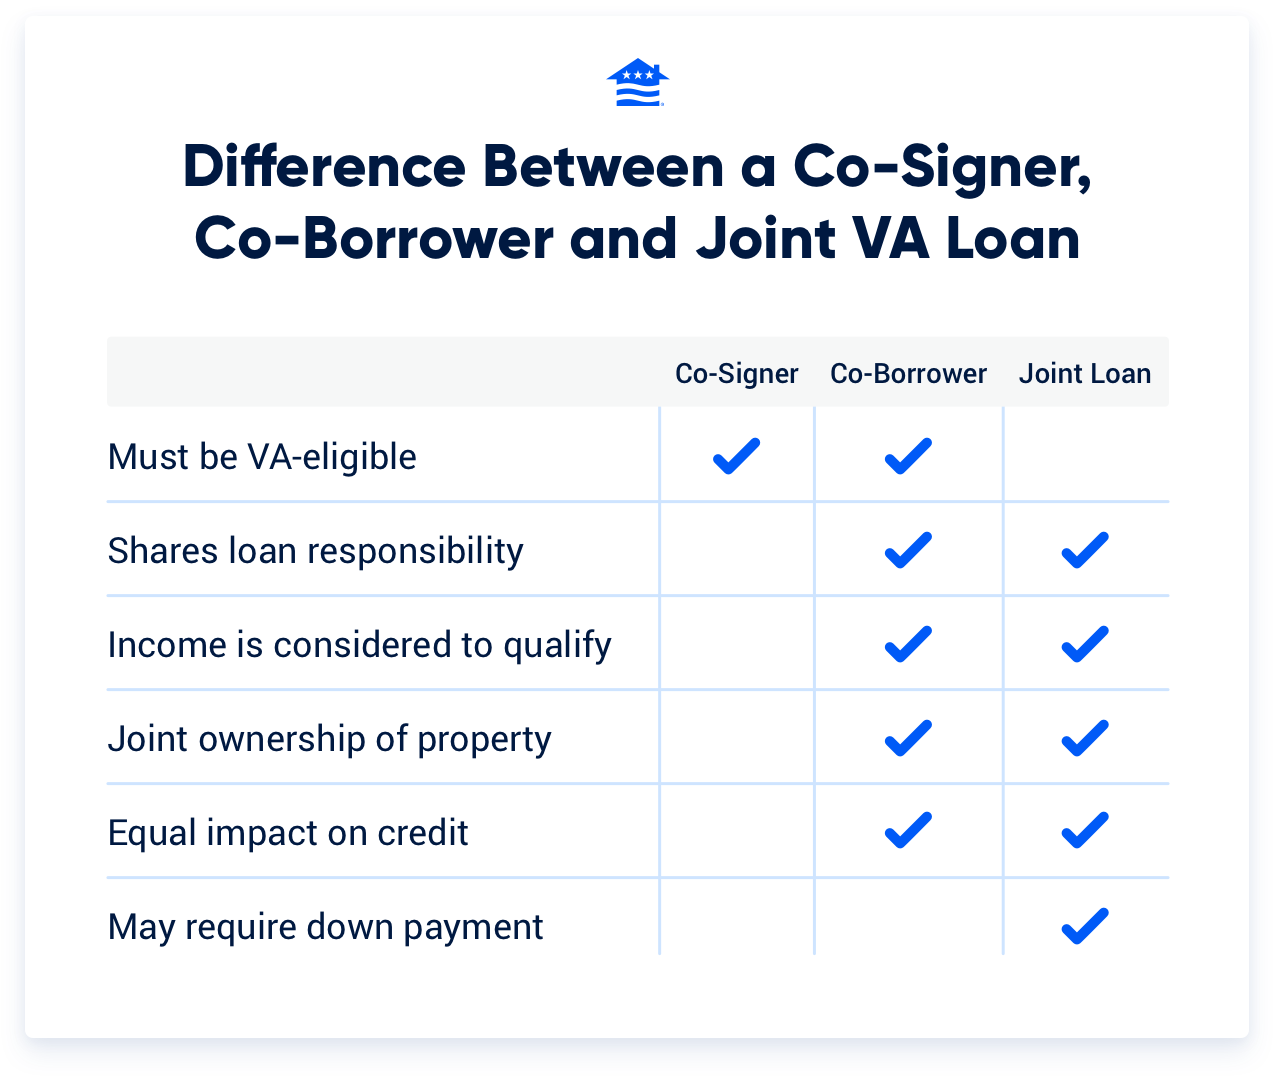 A table highlighting the differences between joint VA loans and co-signers or co-borrowers on VA loans.